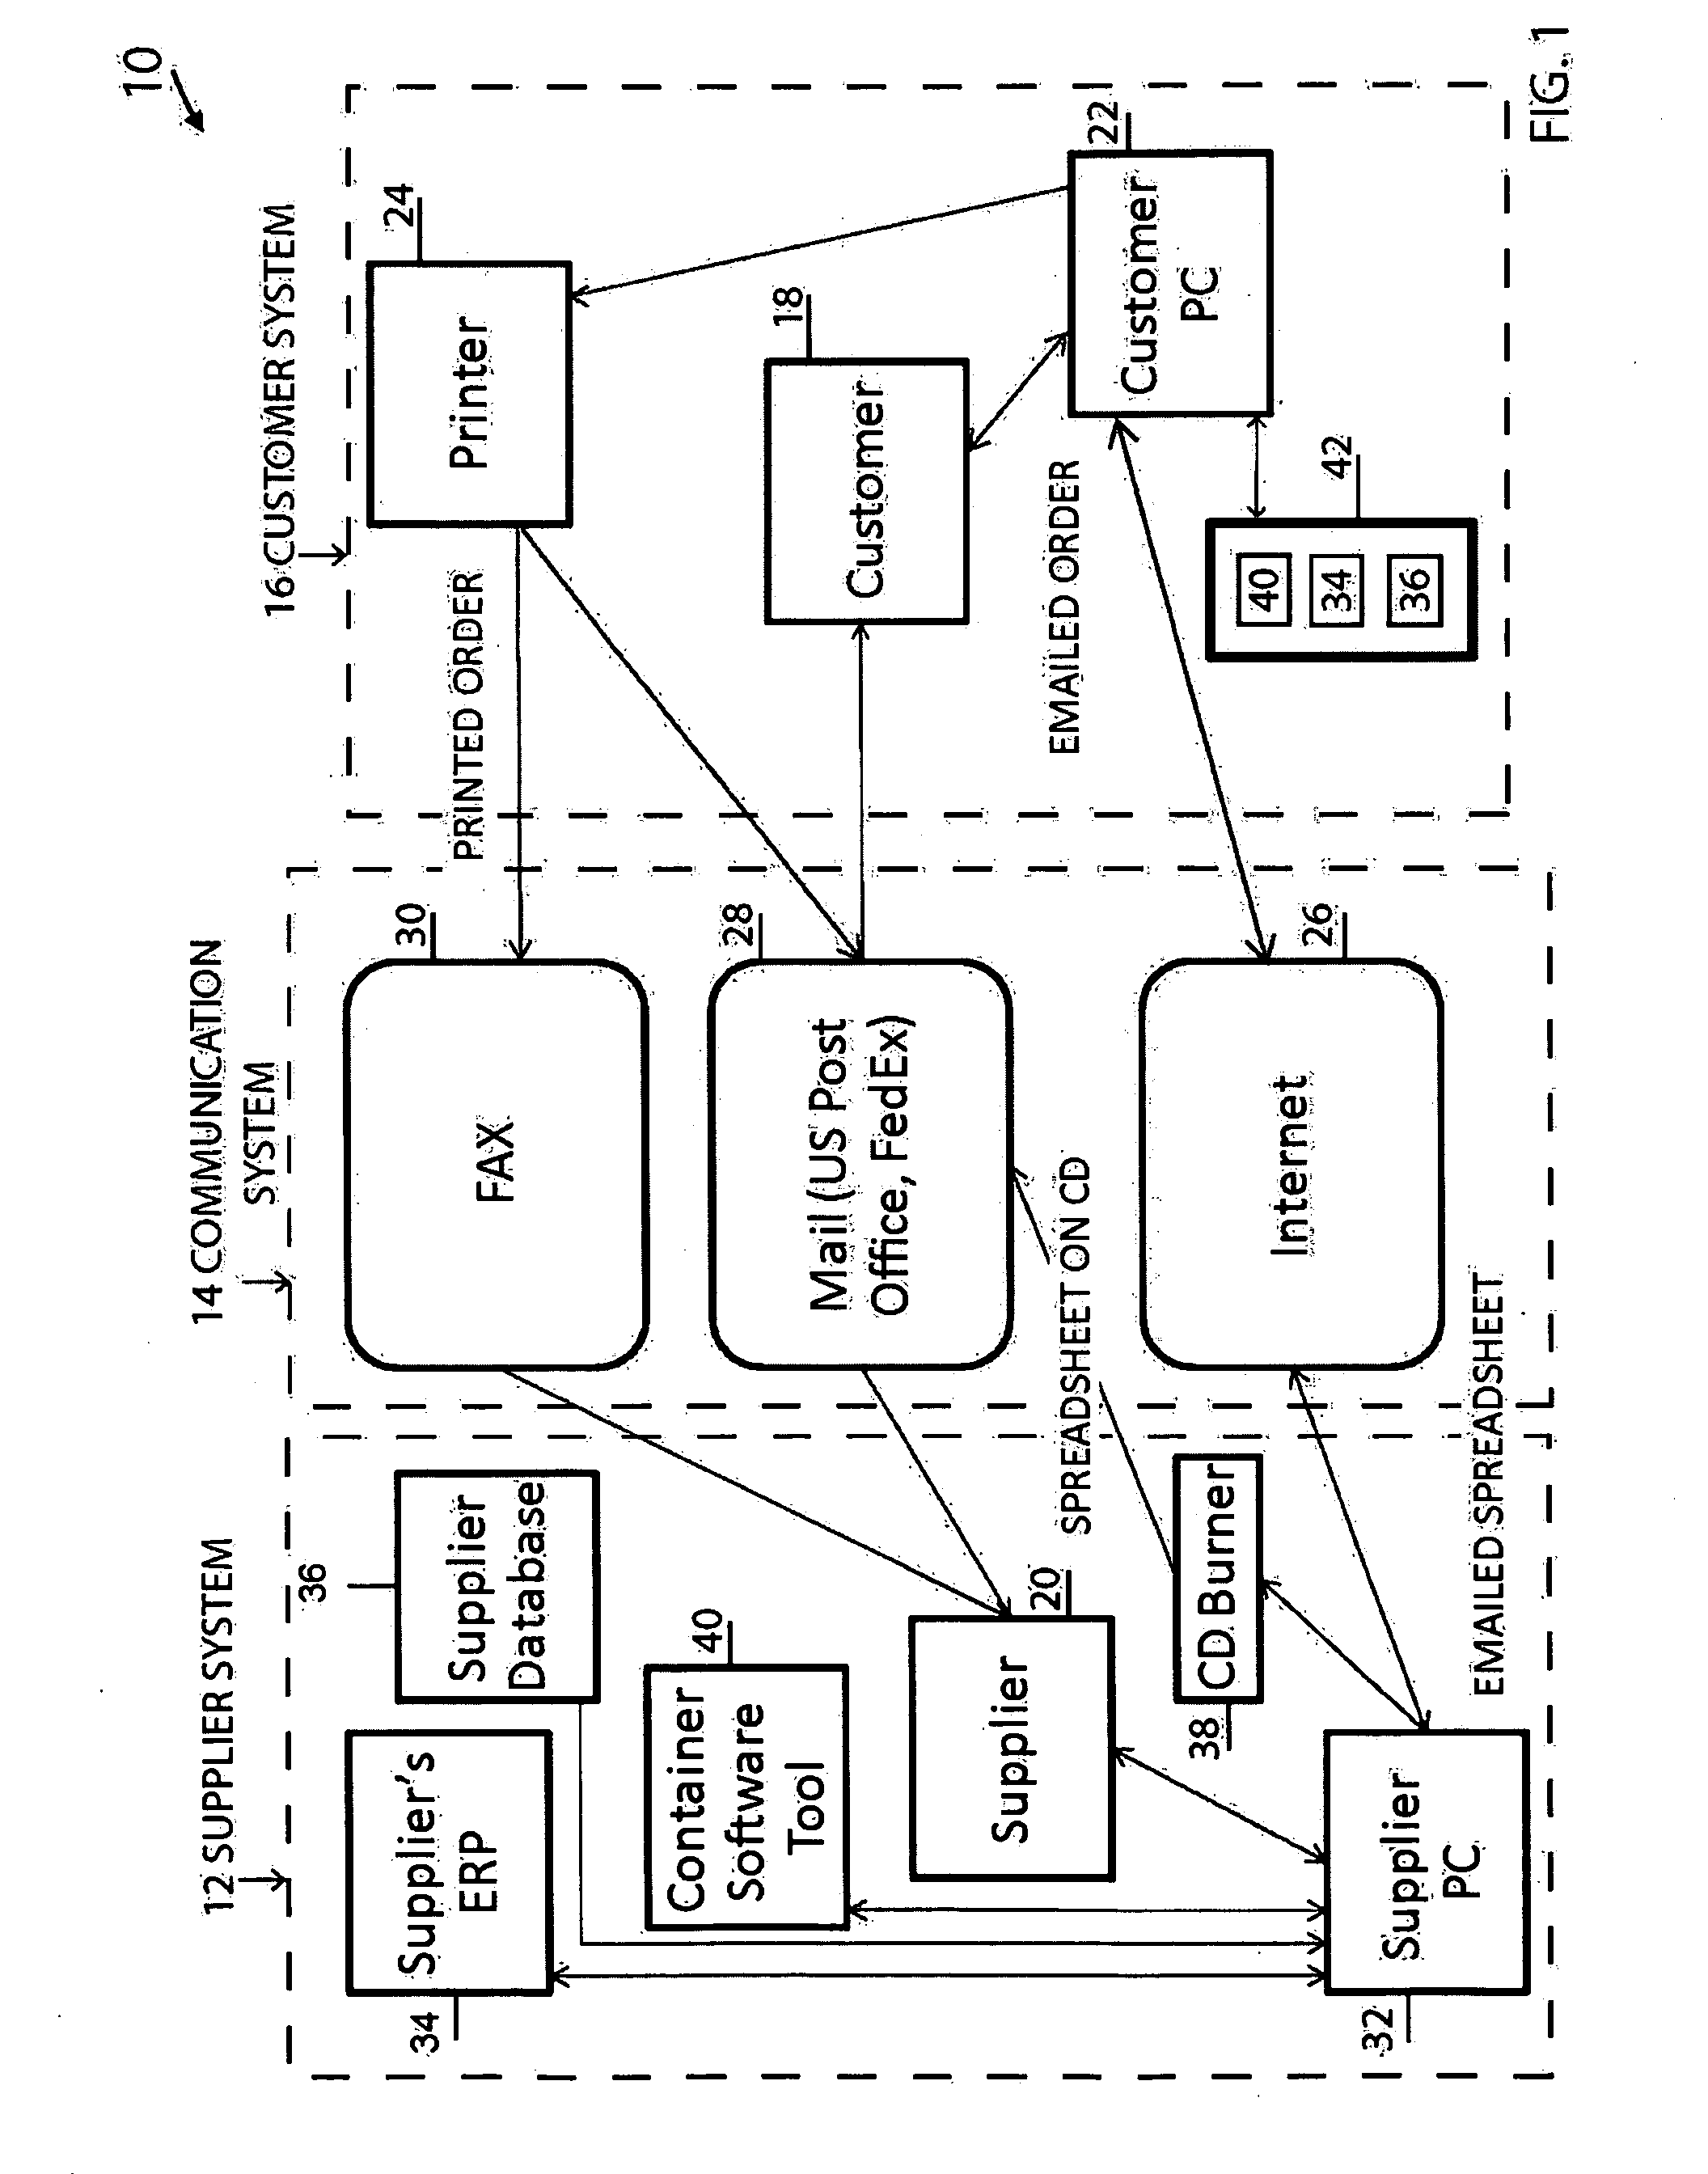 System and Method for Optimizing the Loading of Shipping Containers